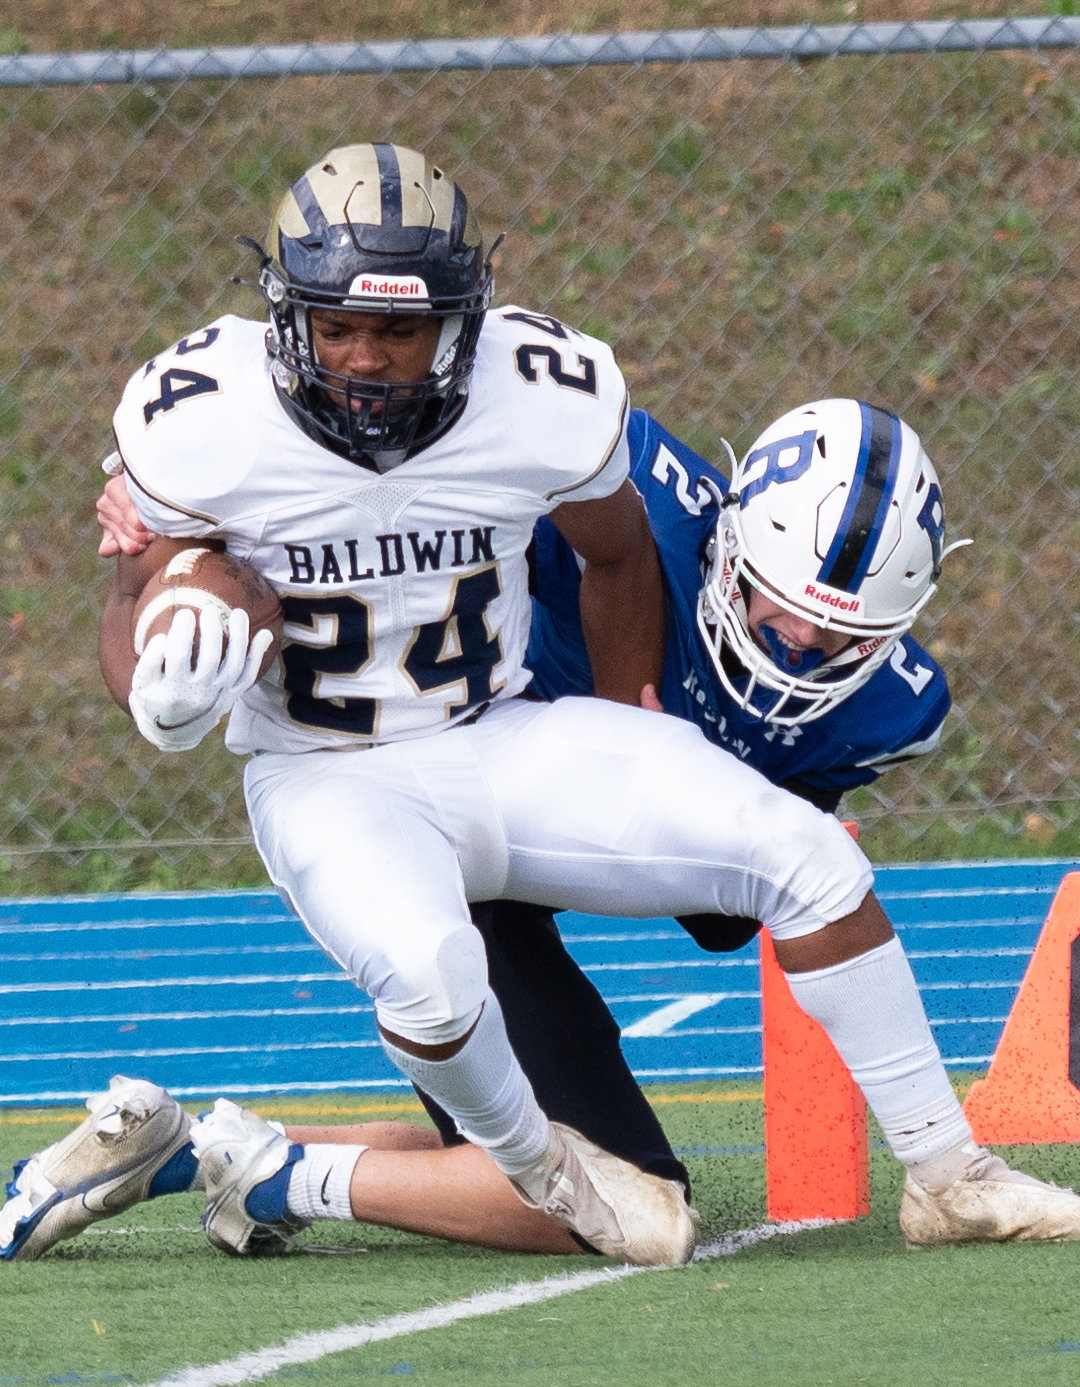 Sophomore Shane Mauldin had a 41-yard touchdown run last Saturday as Baldwin closed out the season with a win over Roslyn to finish 4-4.